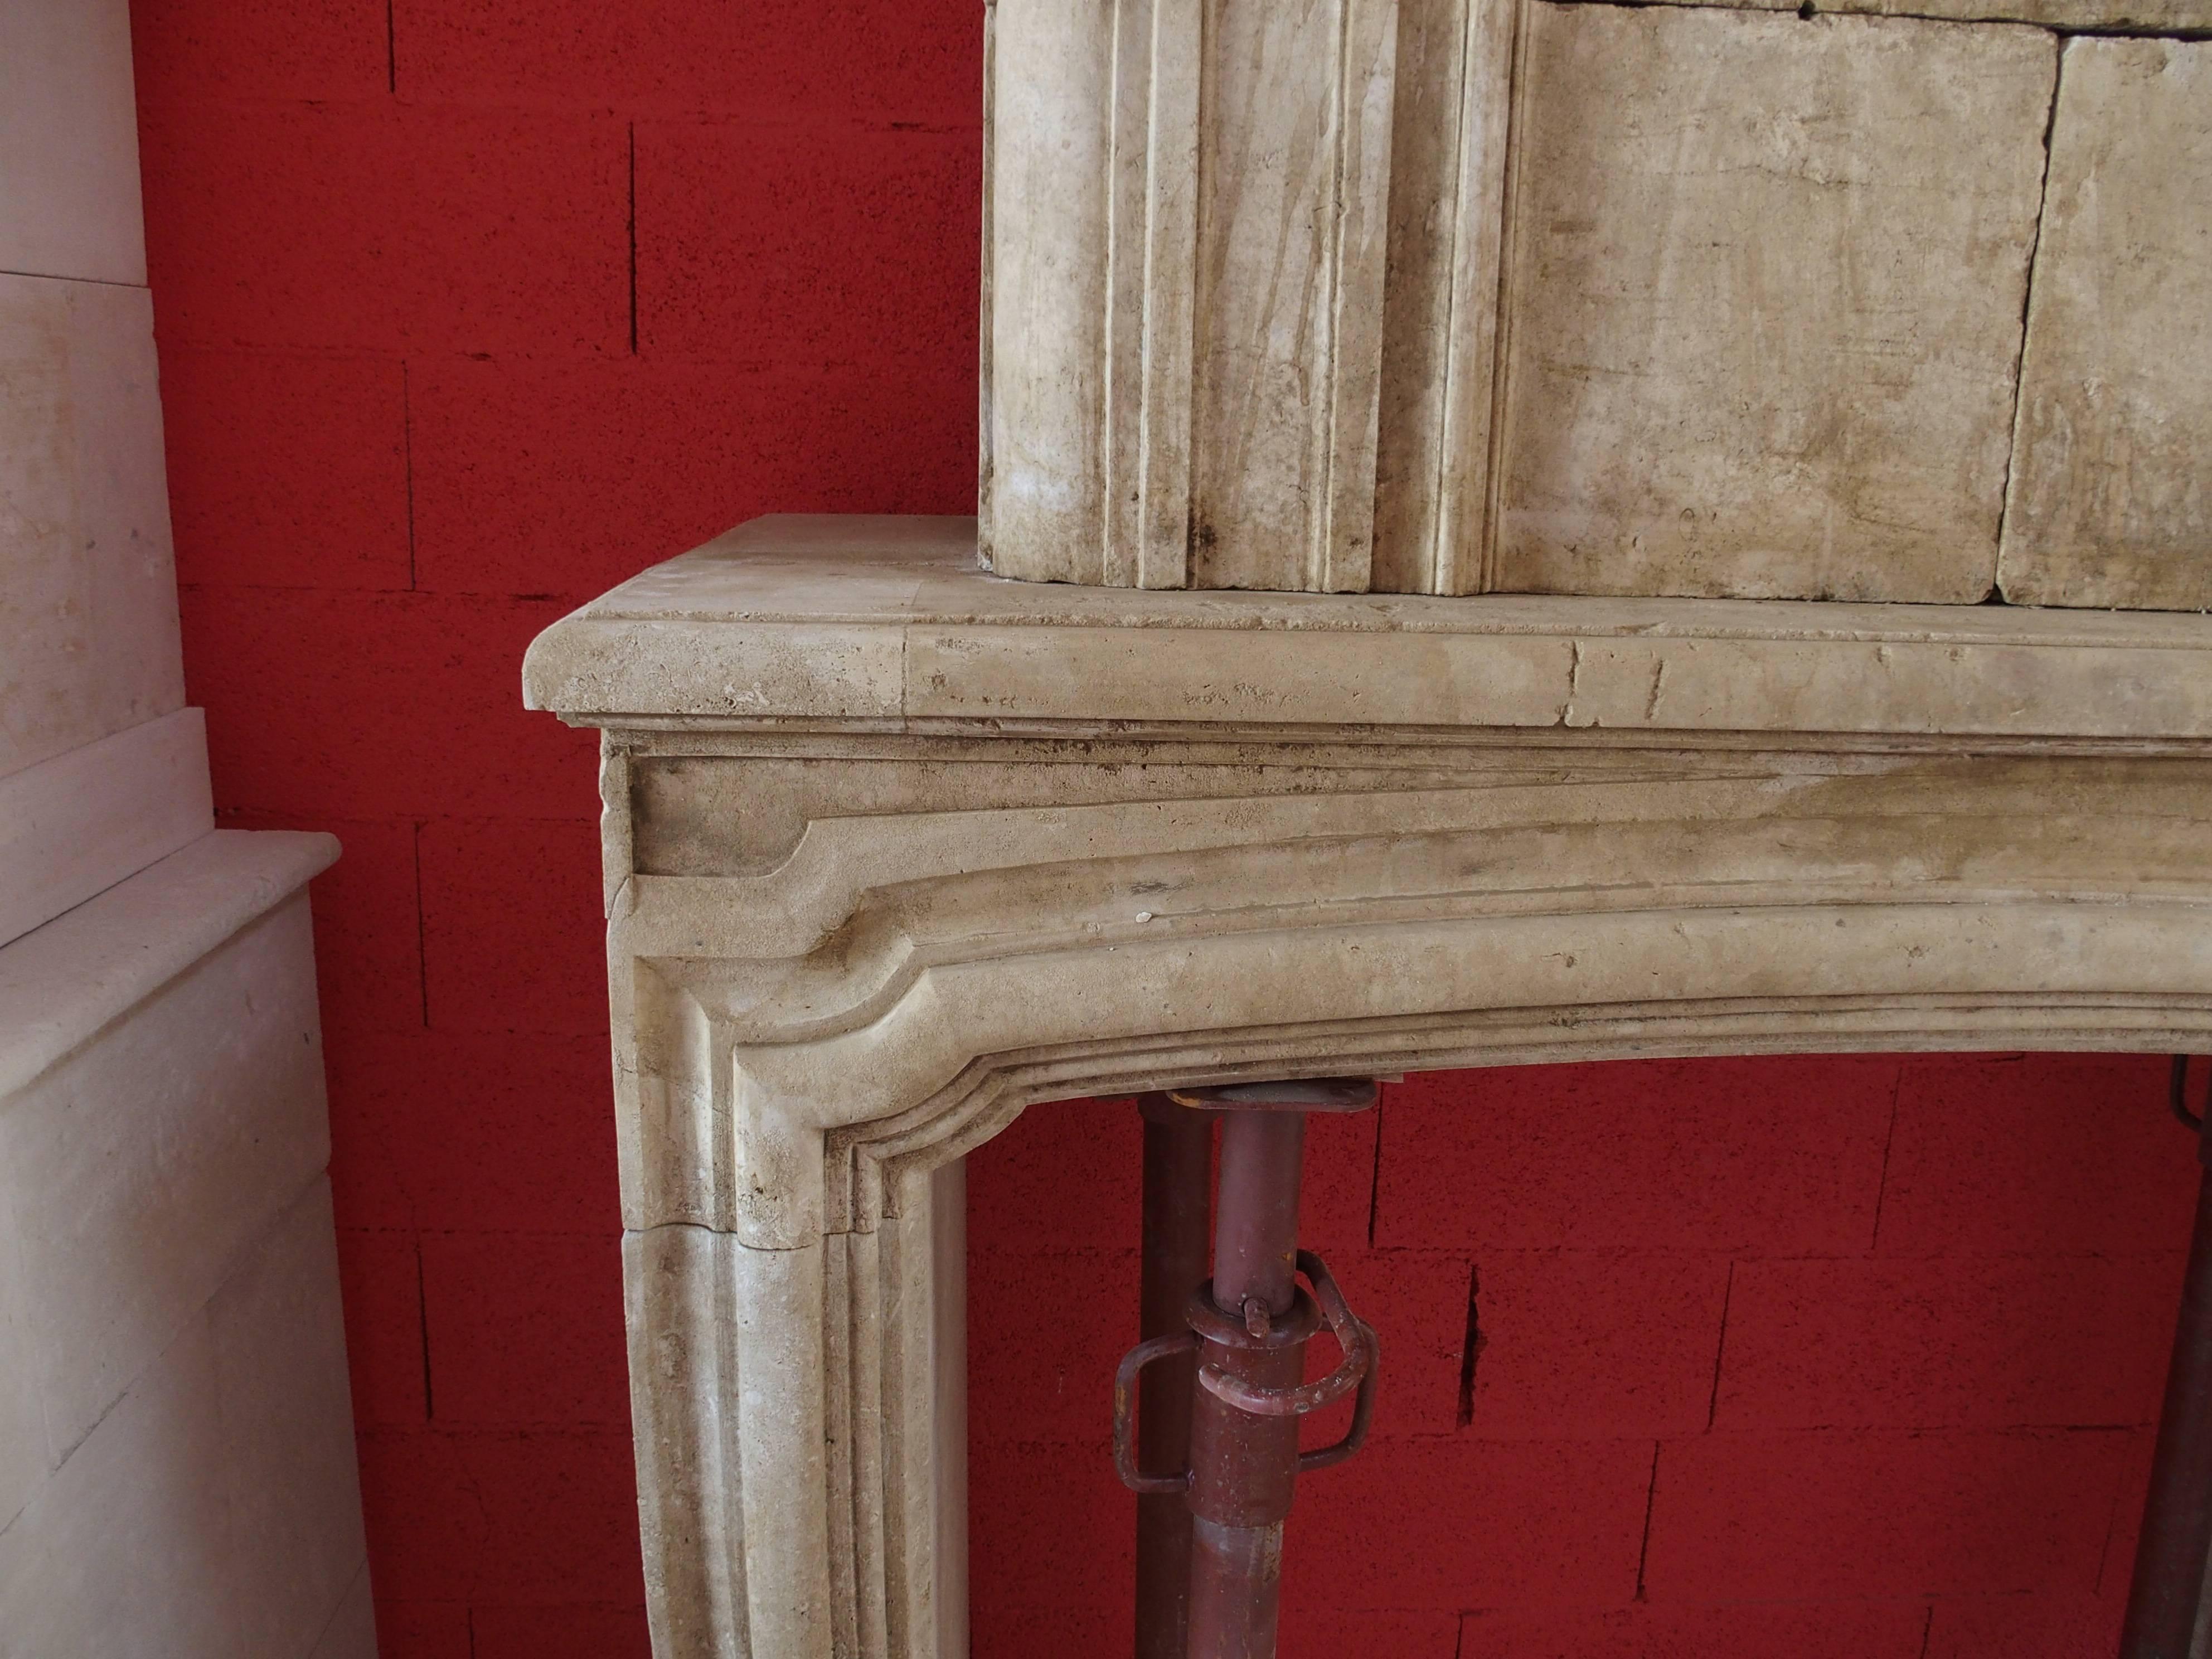 This exceptional 18th century fireplace with trumeau was carved into a natural French limestone.

The lower part of this antique mantel consists of a pair of slightly curved jambs, a low-arched lintel and a finely molded shelf. A wide bolection